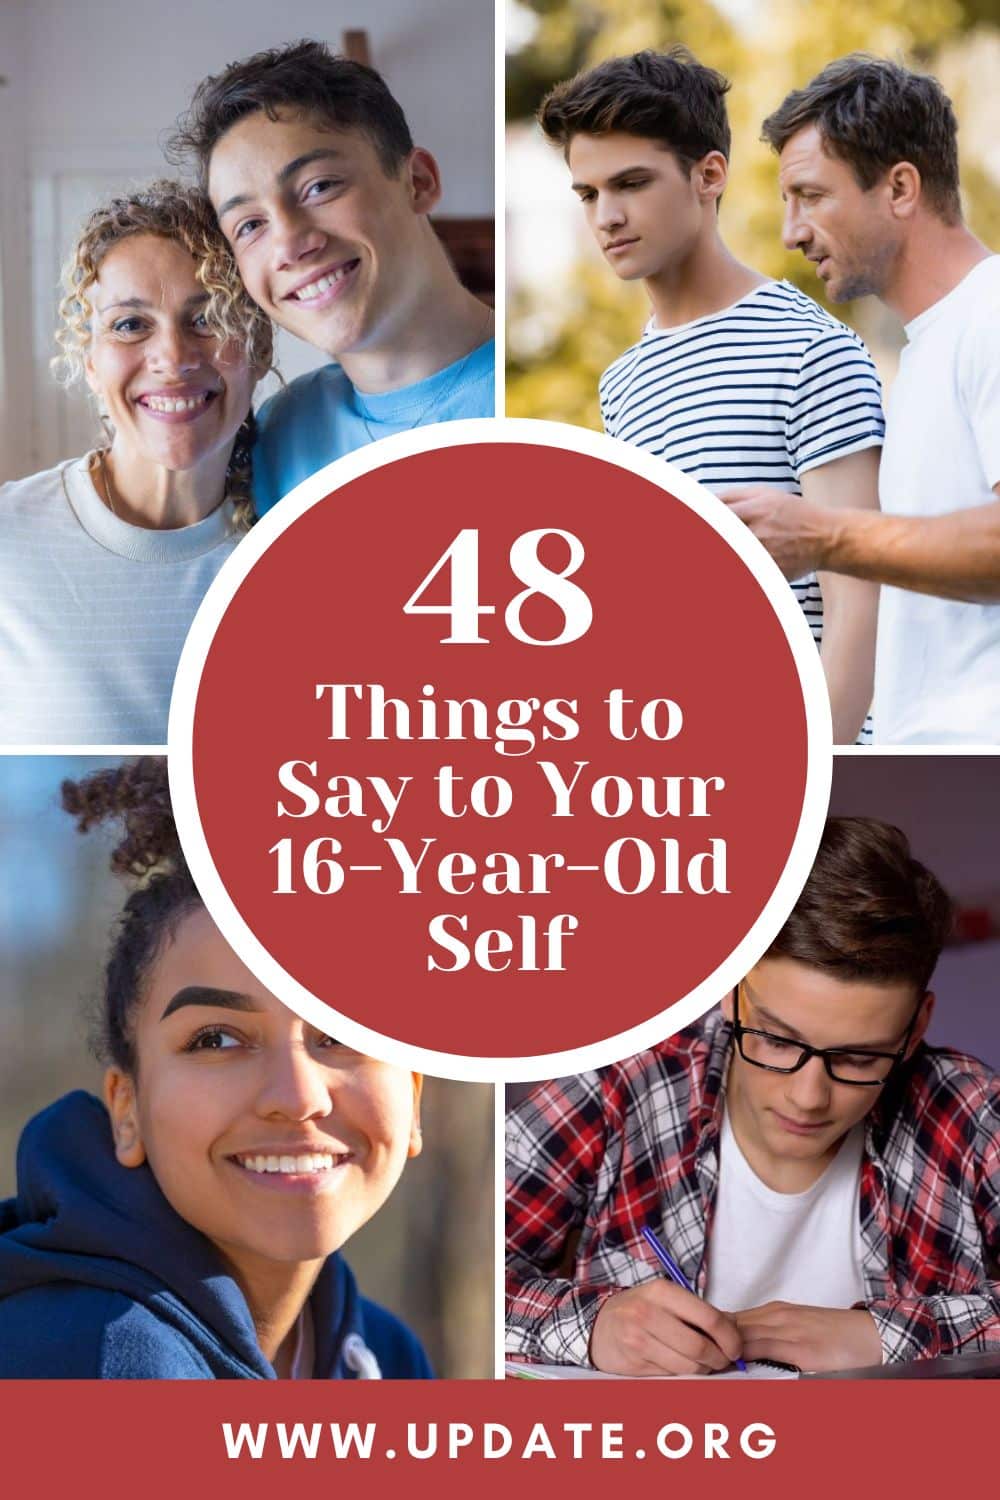 48 Things to Say to Your 16-Year-Old Self pinterest image.